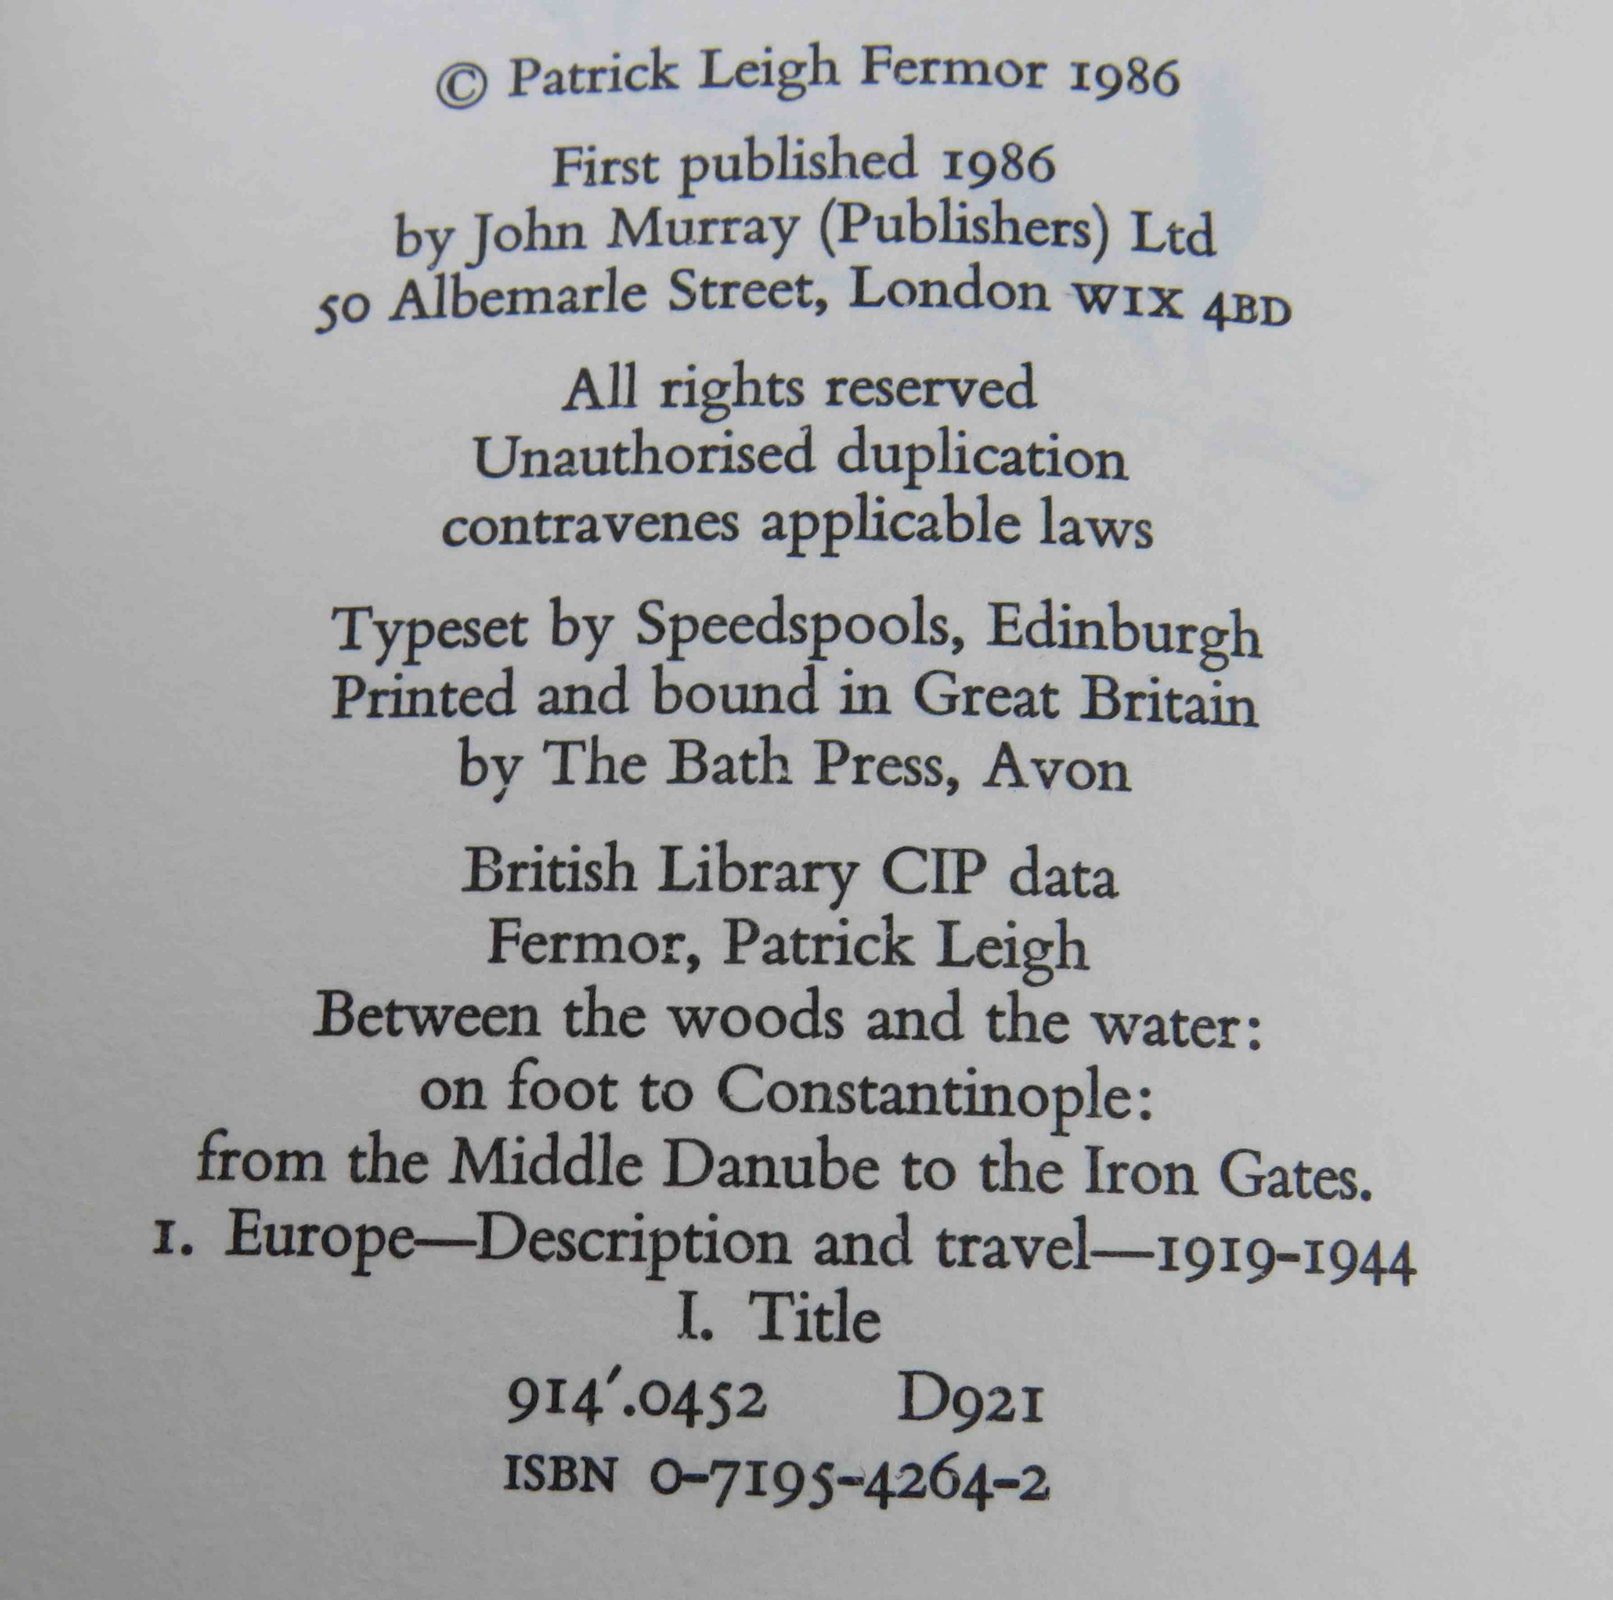 between the woods and the water by patrick leigh fermor